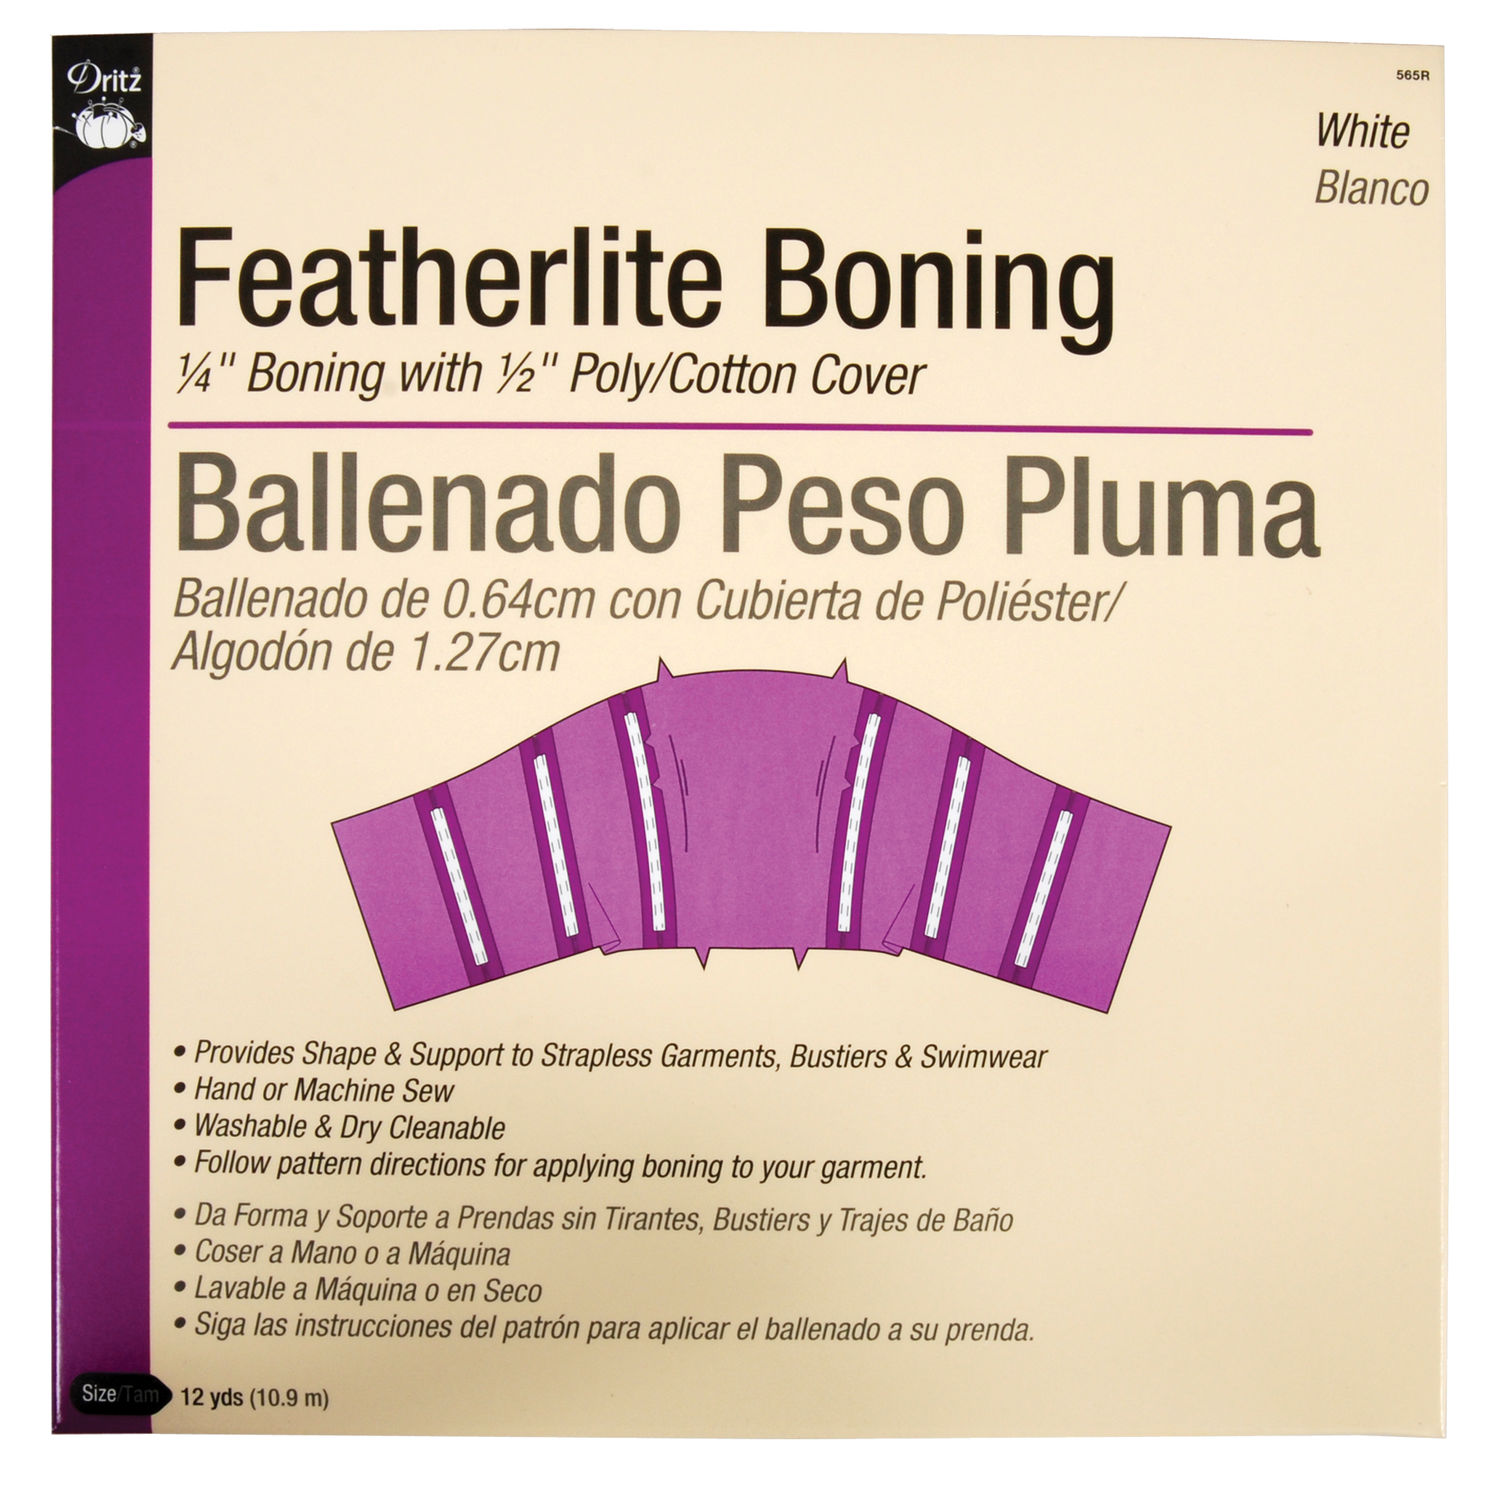 Dritz Featherlite Boning - Black - 1/4 Boning with 1/2 Poly/Cotton Cover